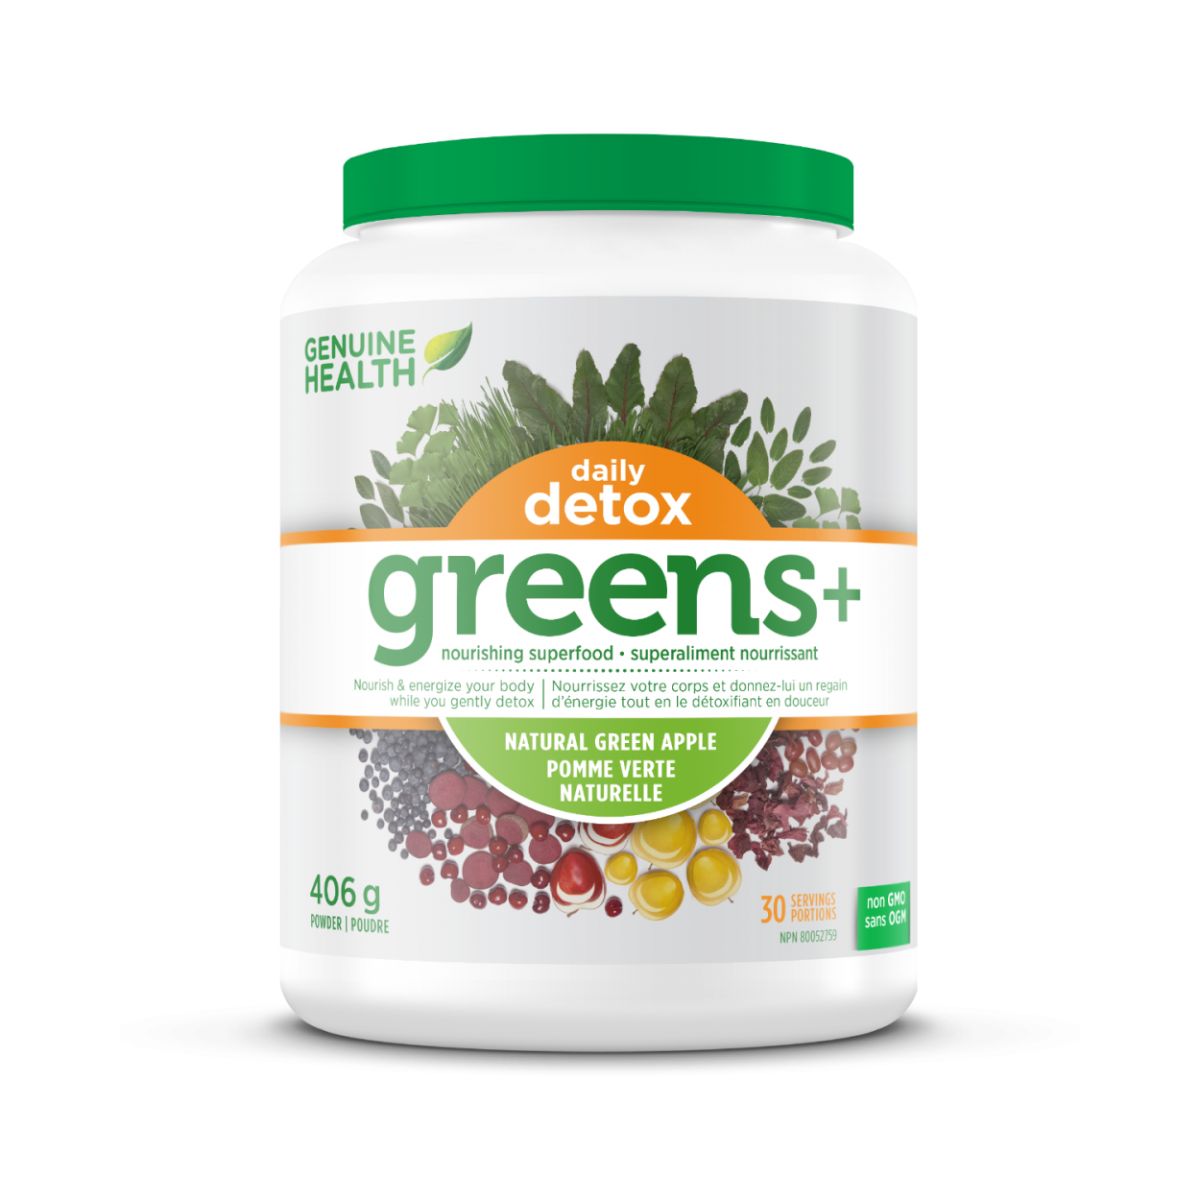 Genuine Health Greens+ Daily Detox - Natural Green Apple 406g product image - Green superfood supplement in a green and white tub